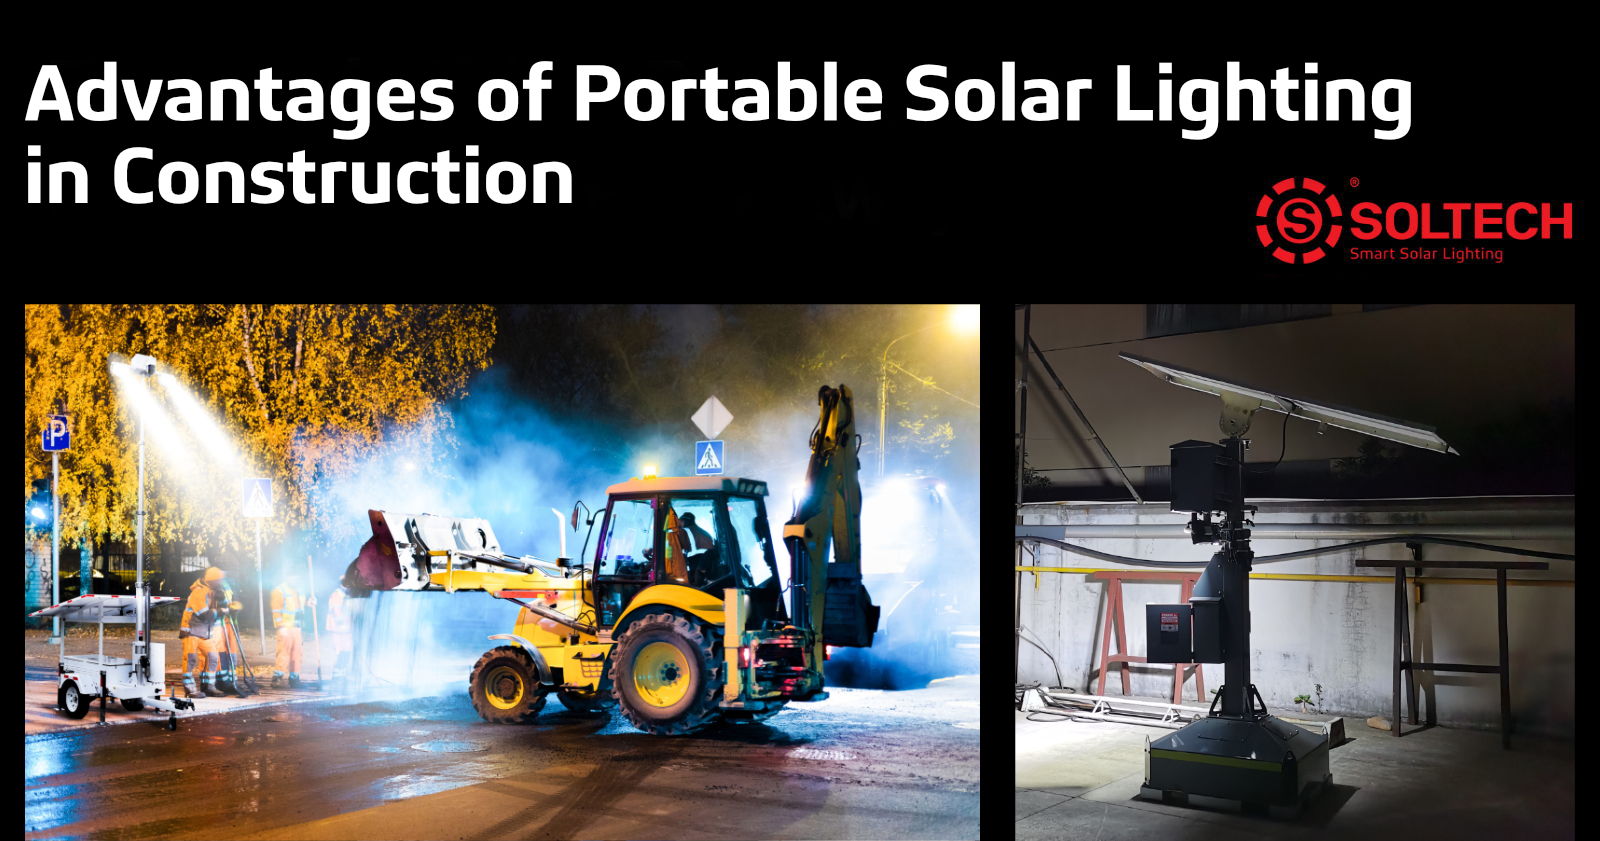 A composite image showing two portable solar lights at construction sites.